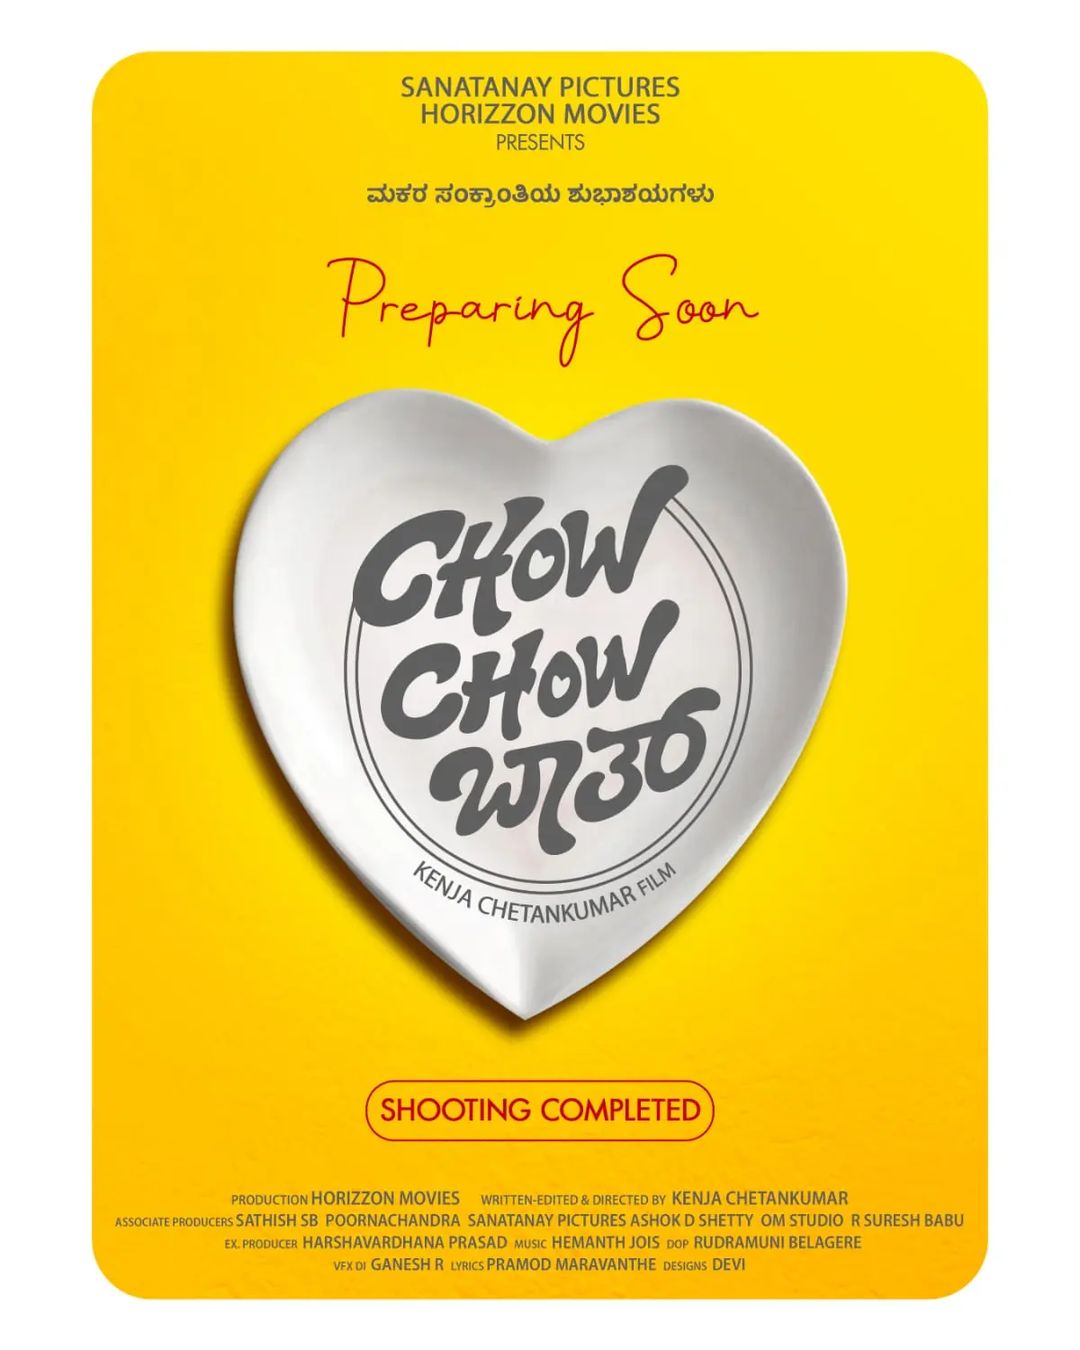 Chow Chow Bath Movie (2023) Cast, Release Date, Story, Budget, Collection, Poster, Trailer, Review